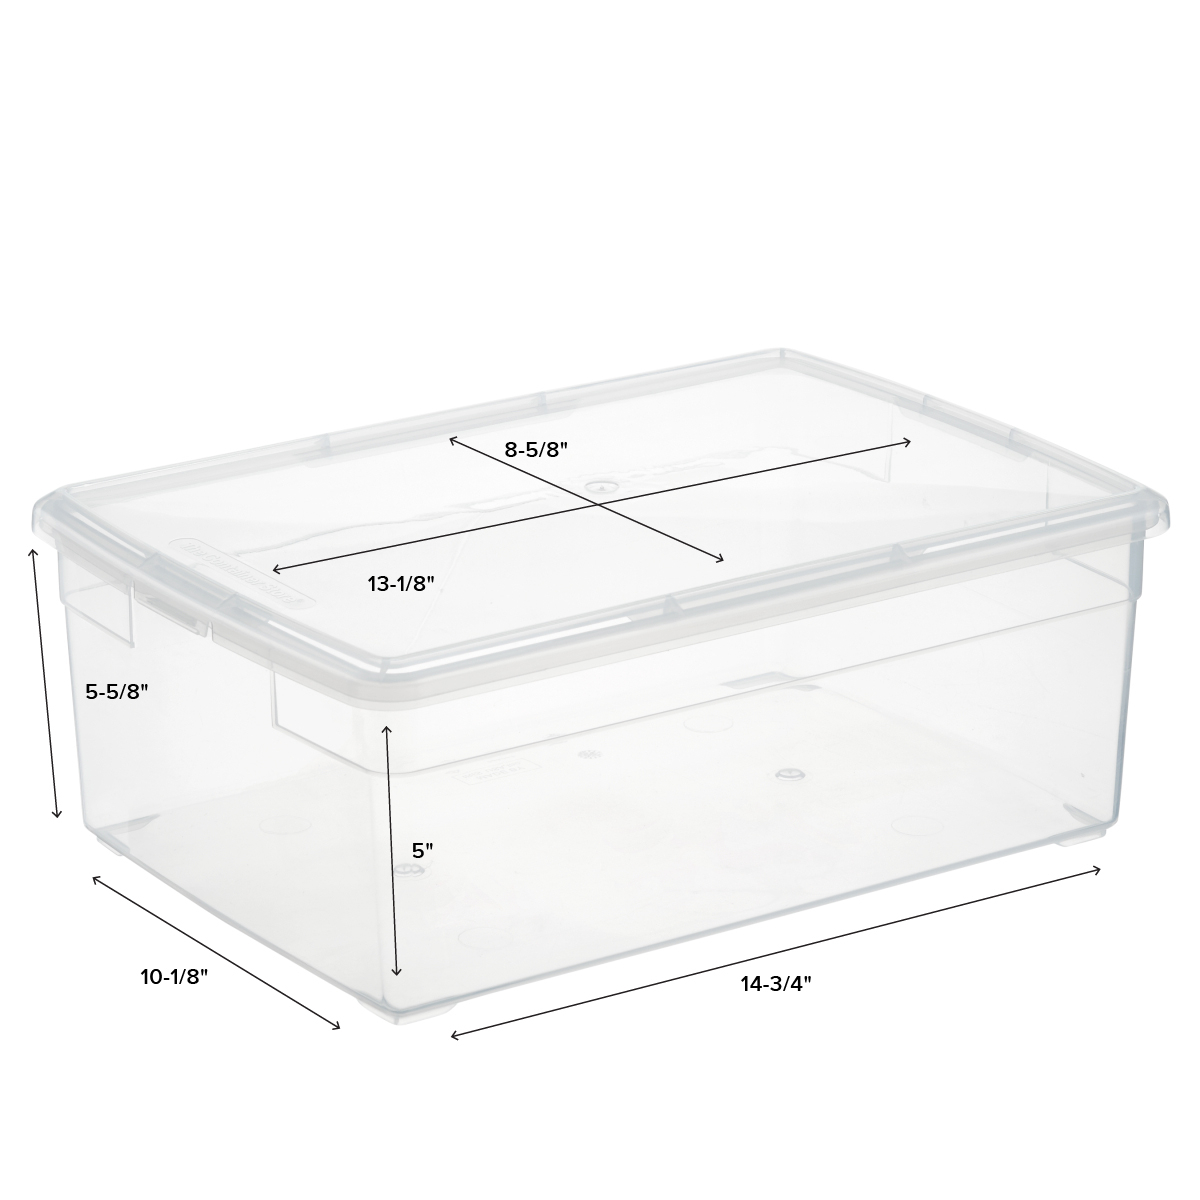 H x 5" L or 3. 2 Lot of 1 Bins Storage Bin Dividers for 15" 